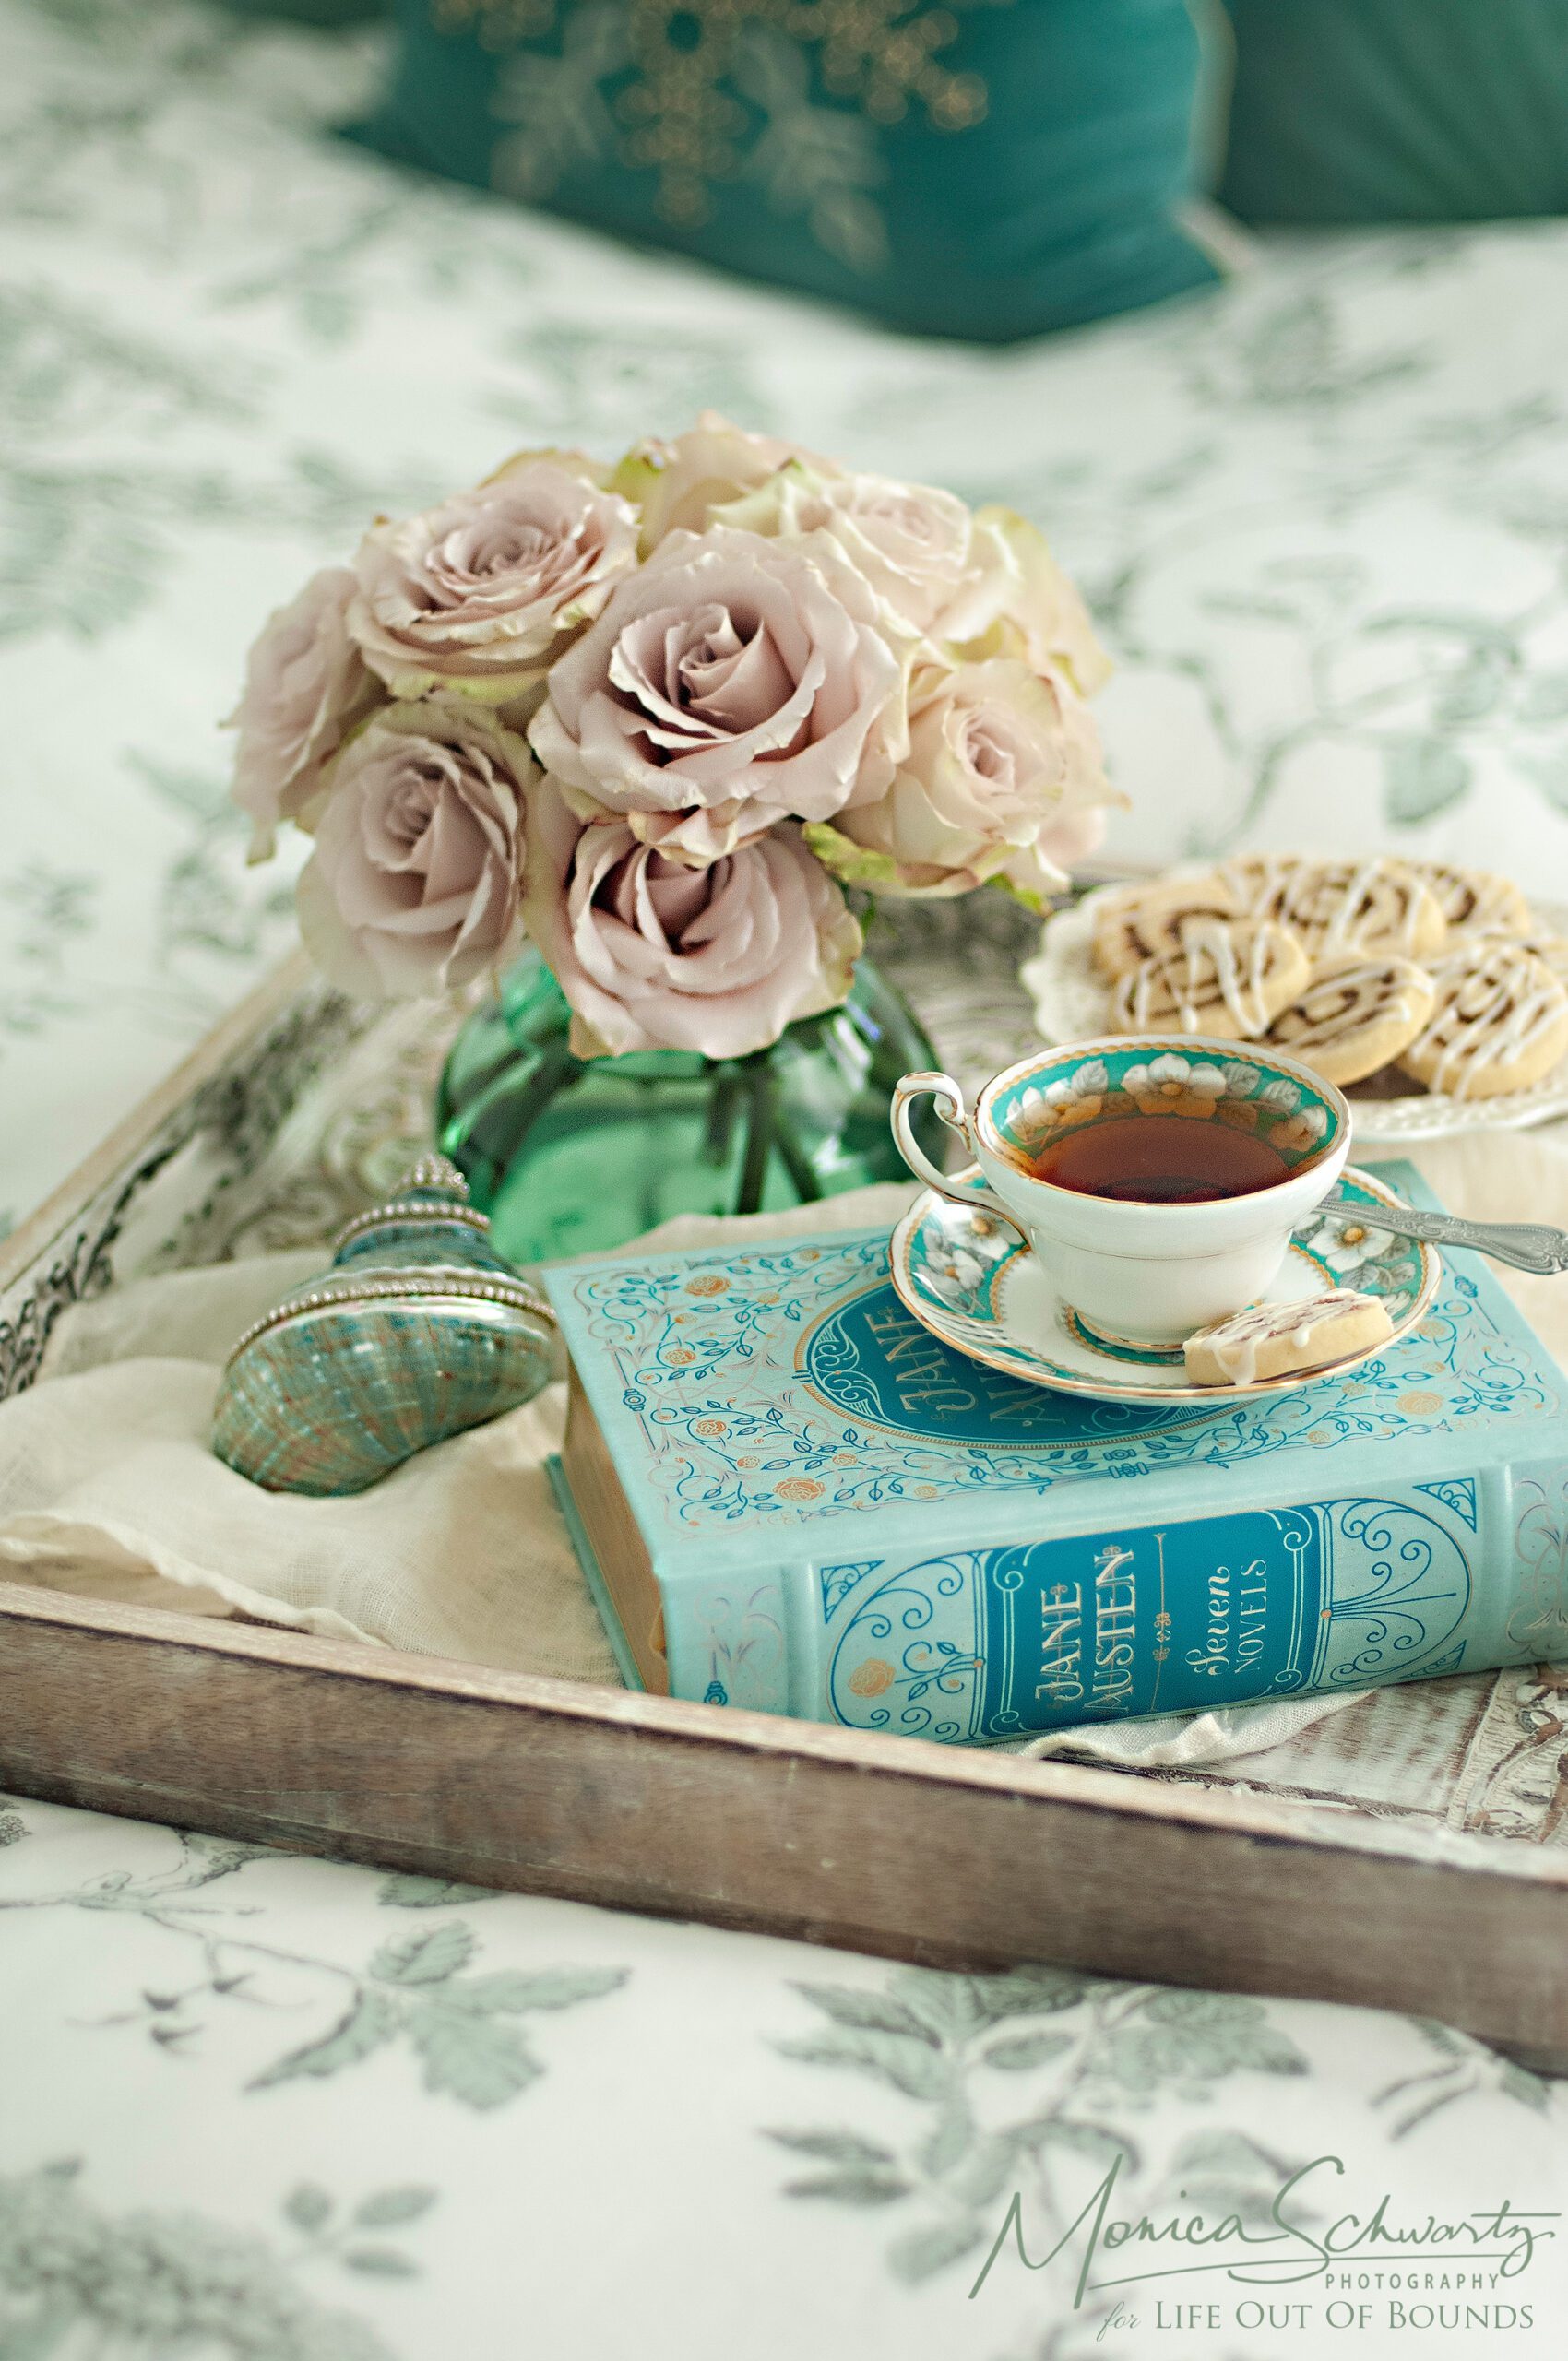 The-comfort-of-tea-and-cookies-with-a-good-book-and-flowers-still-life-photography